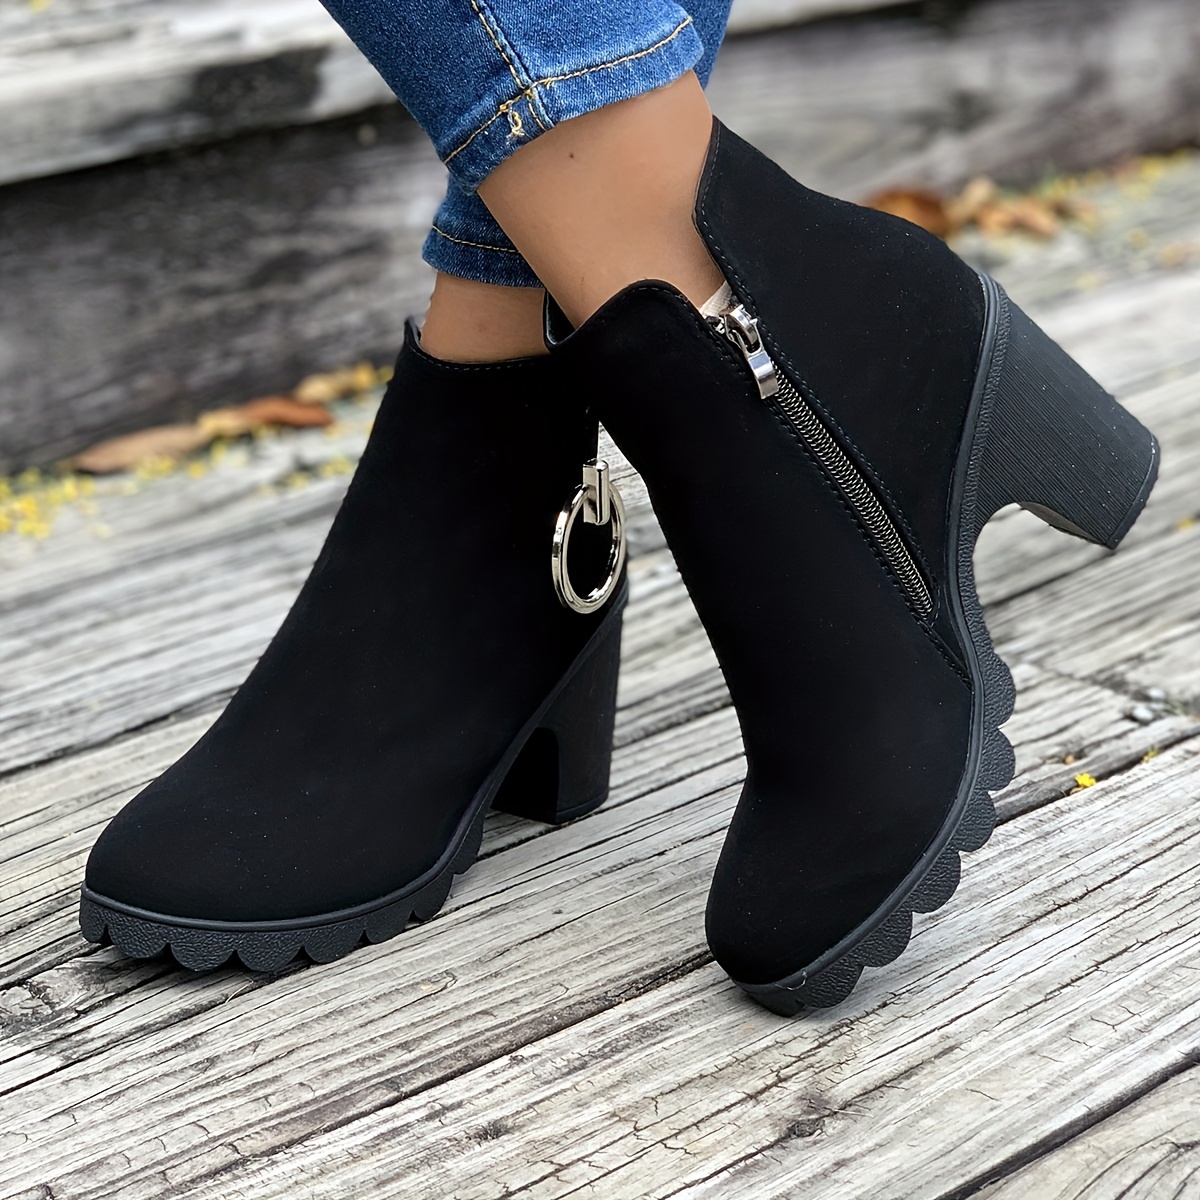 Women's Chunky Heeled Ankle Boots, Fashion Round Toe Side Zipper Booties,  All-Match High Heeled Short Boots